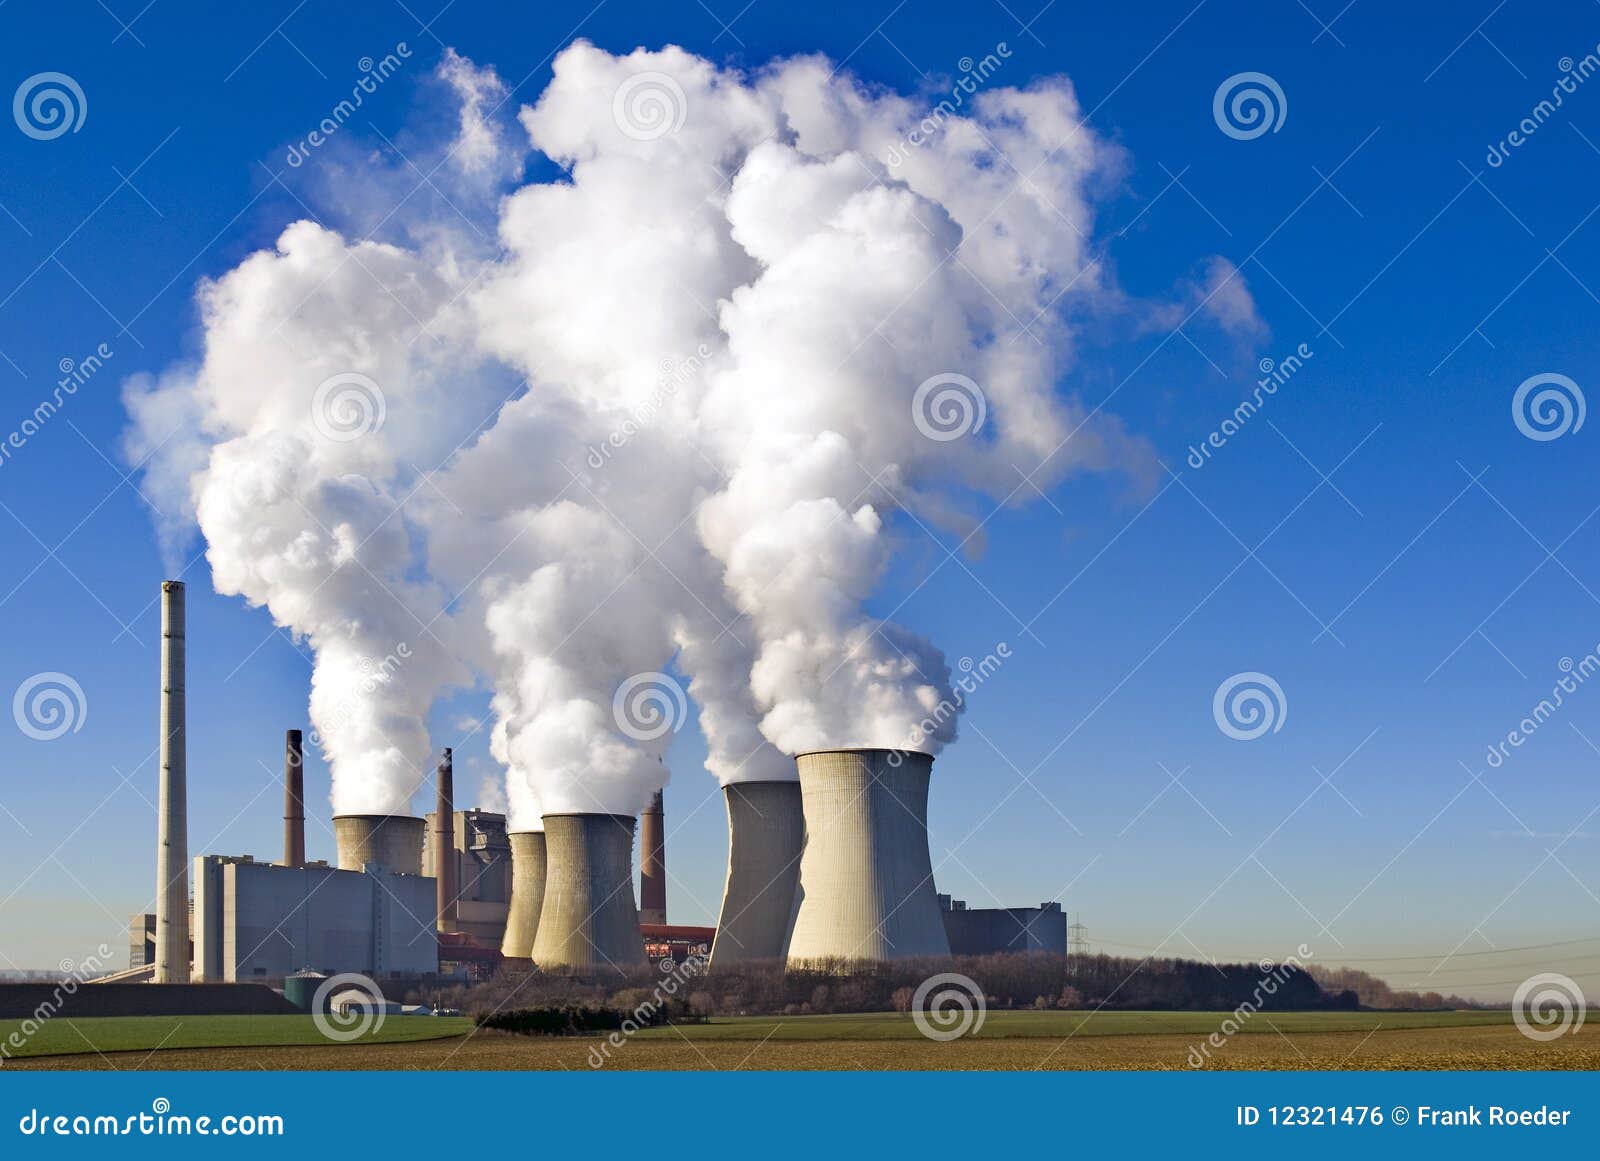 brown coal-fired power station